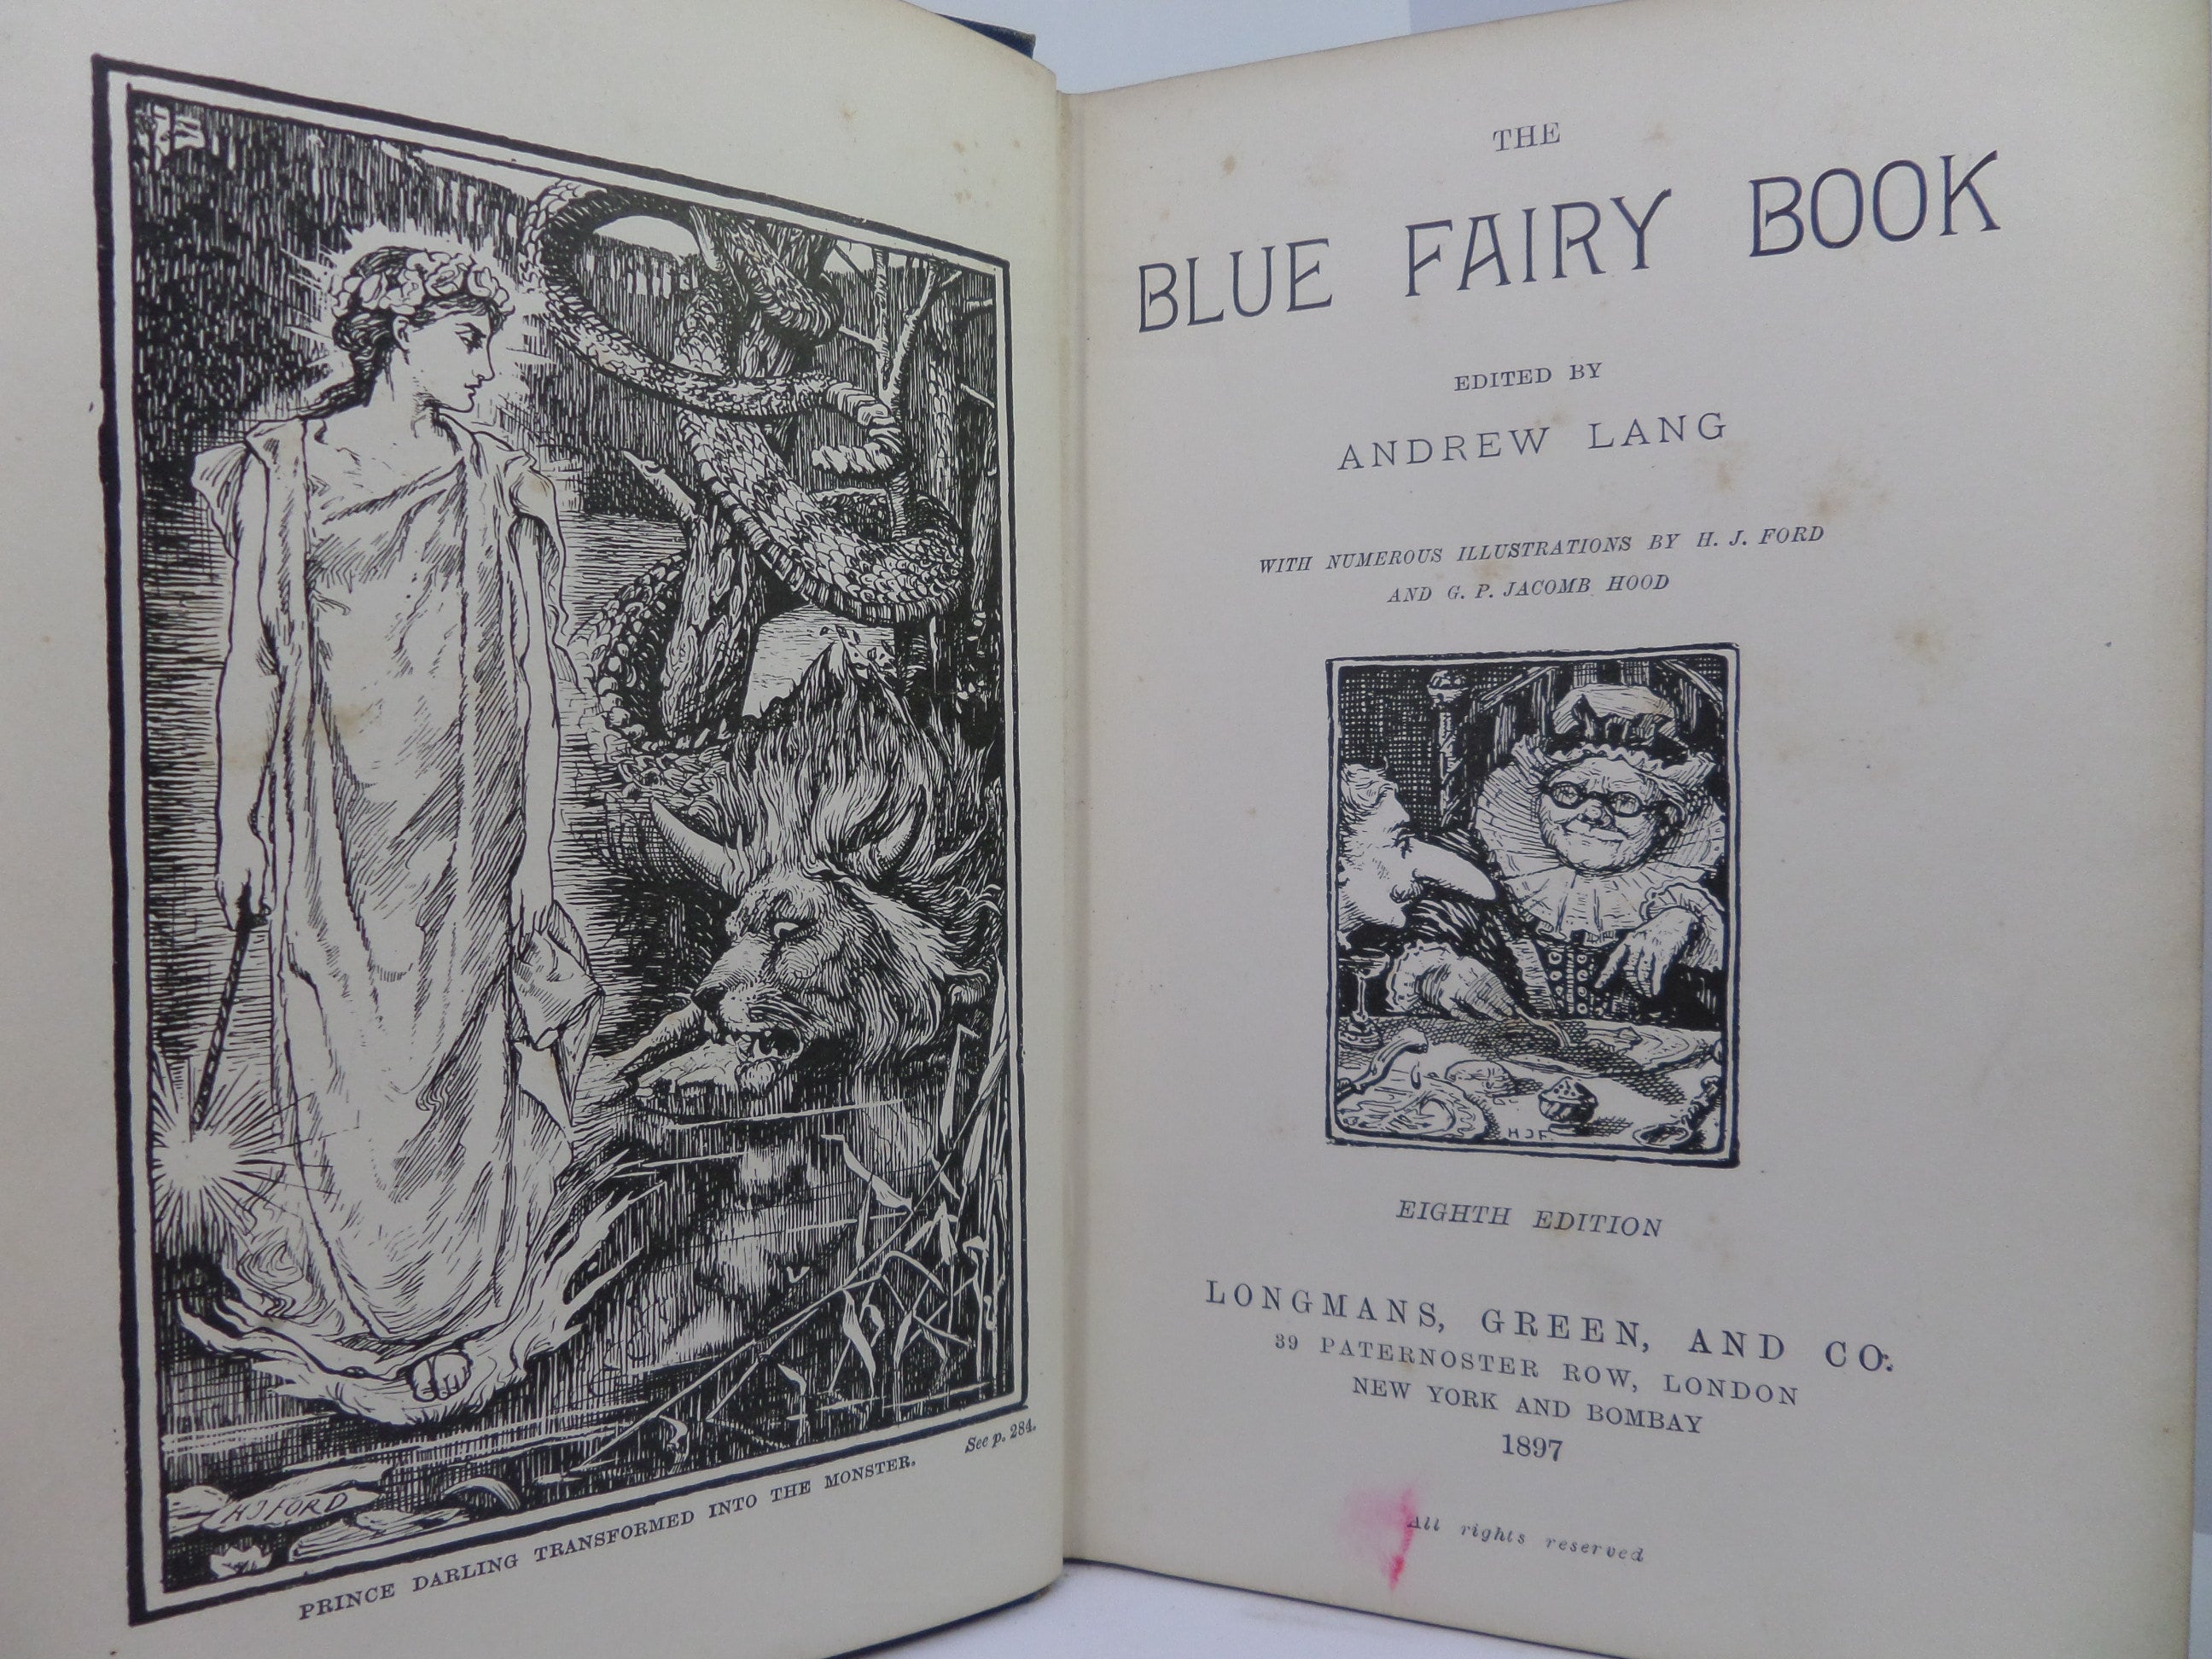 THE BLUE FAIRY BOOK EDITED BY ANDREW LANG 1897 EIGHTH EDITION